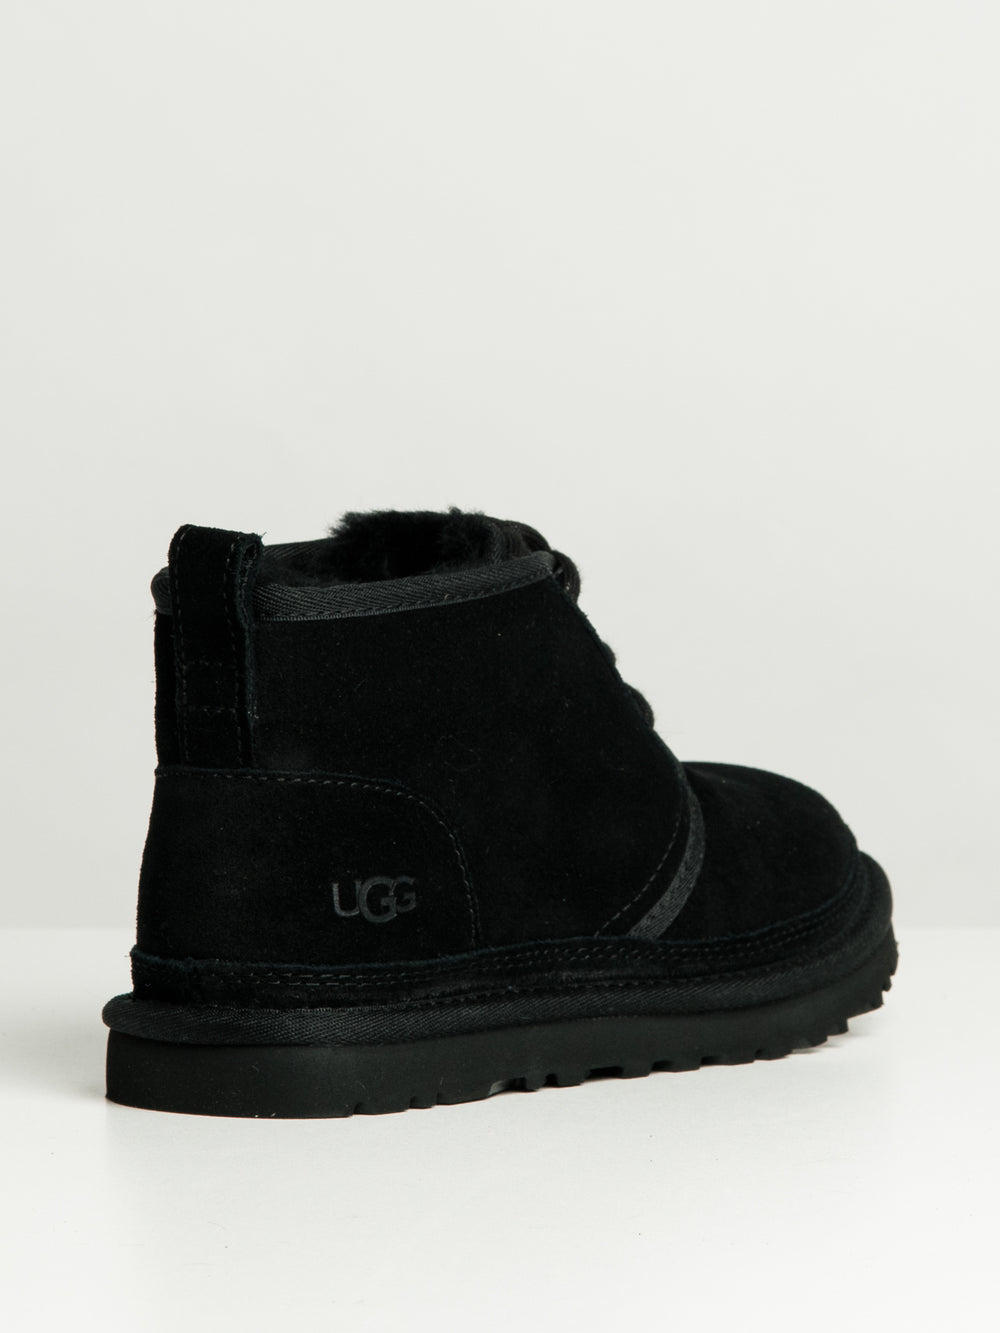 WOMENS UGG NEUMEL BOOT - CLEARANCE